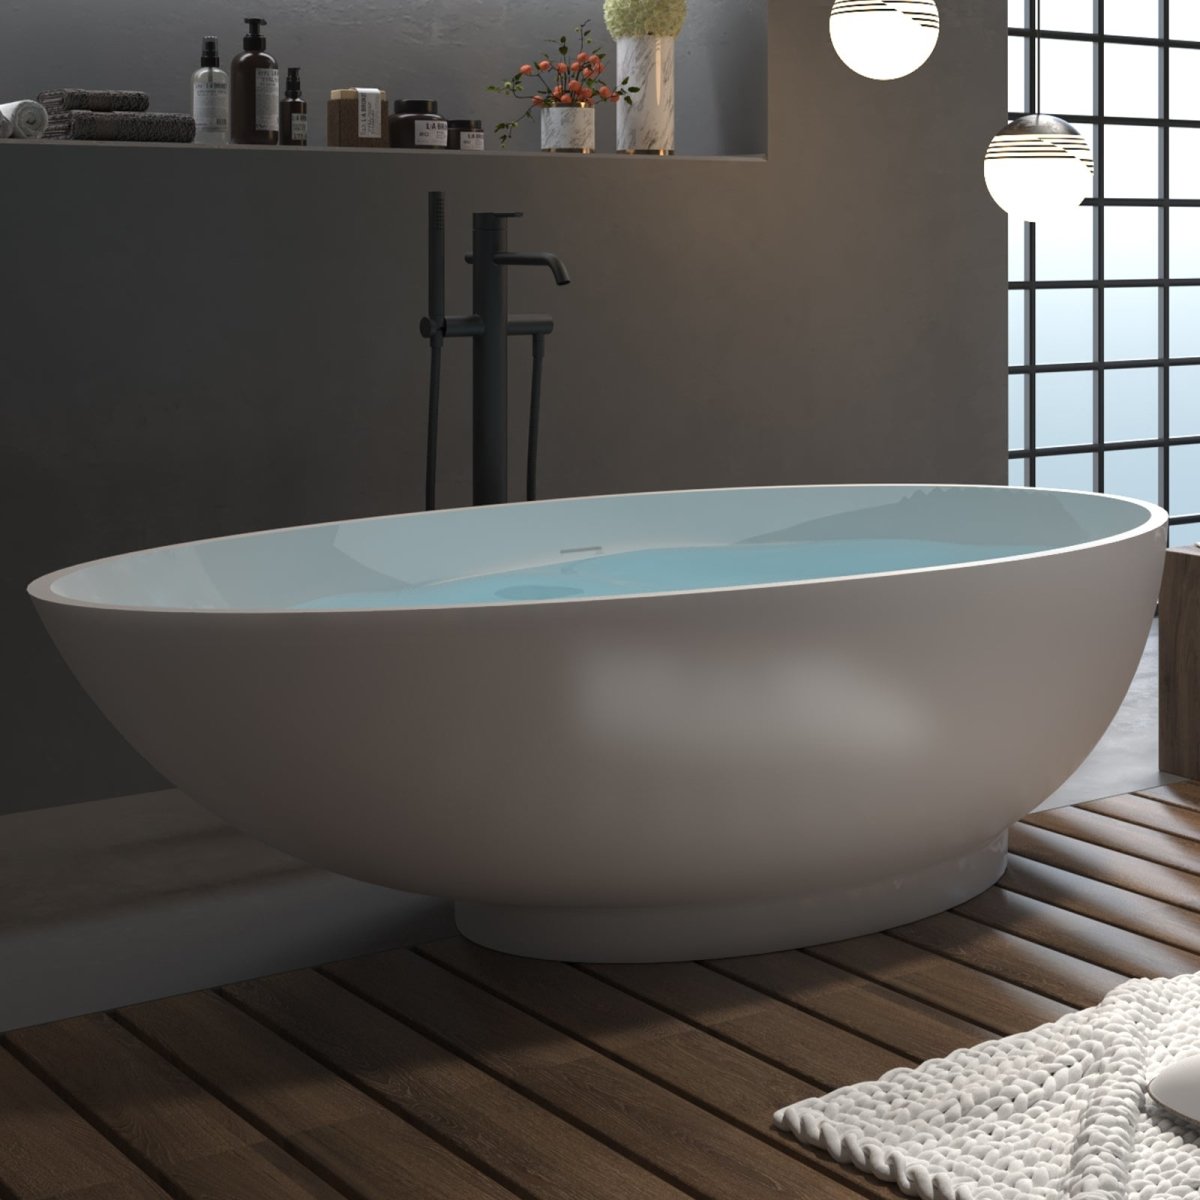 ExBrite 70" Soaking Bathtub Oval-shaped Free standing tub with Overflow